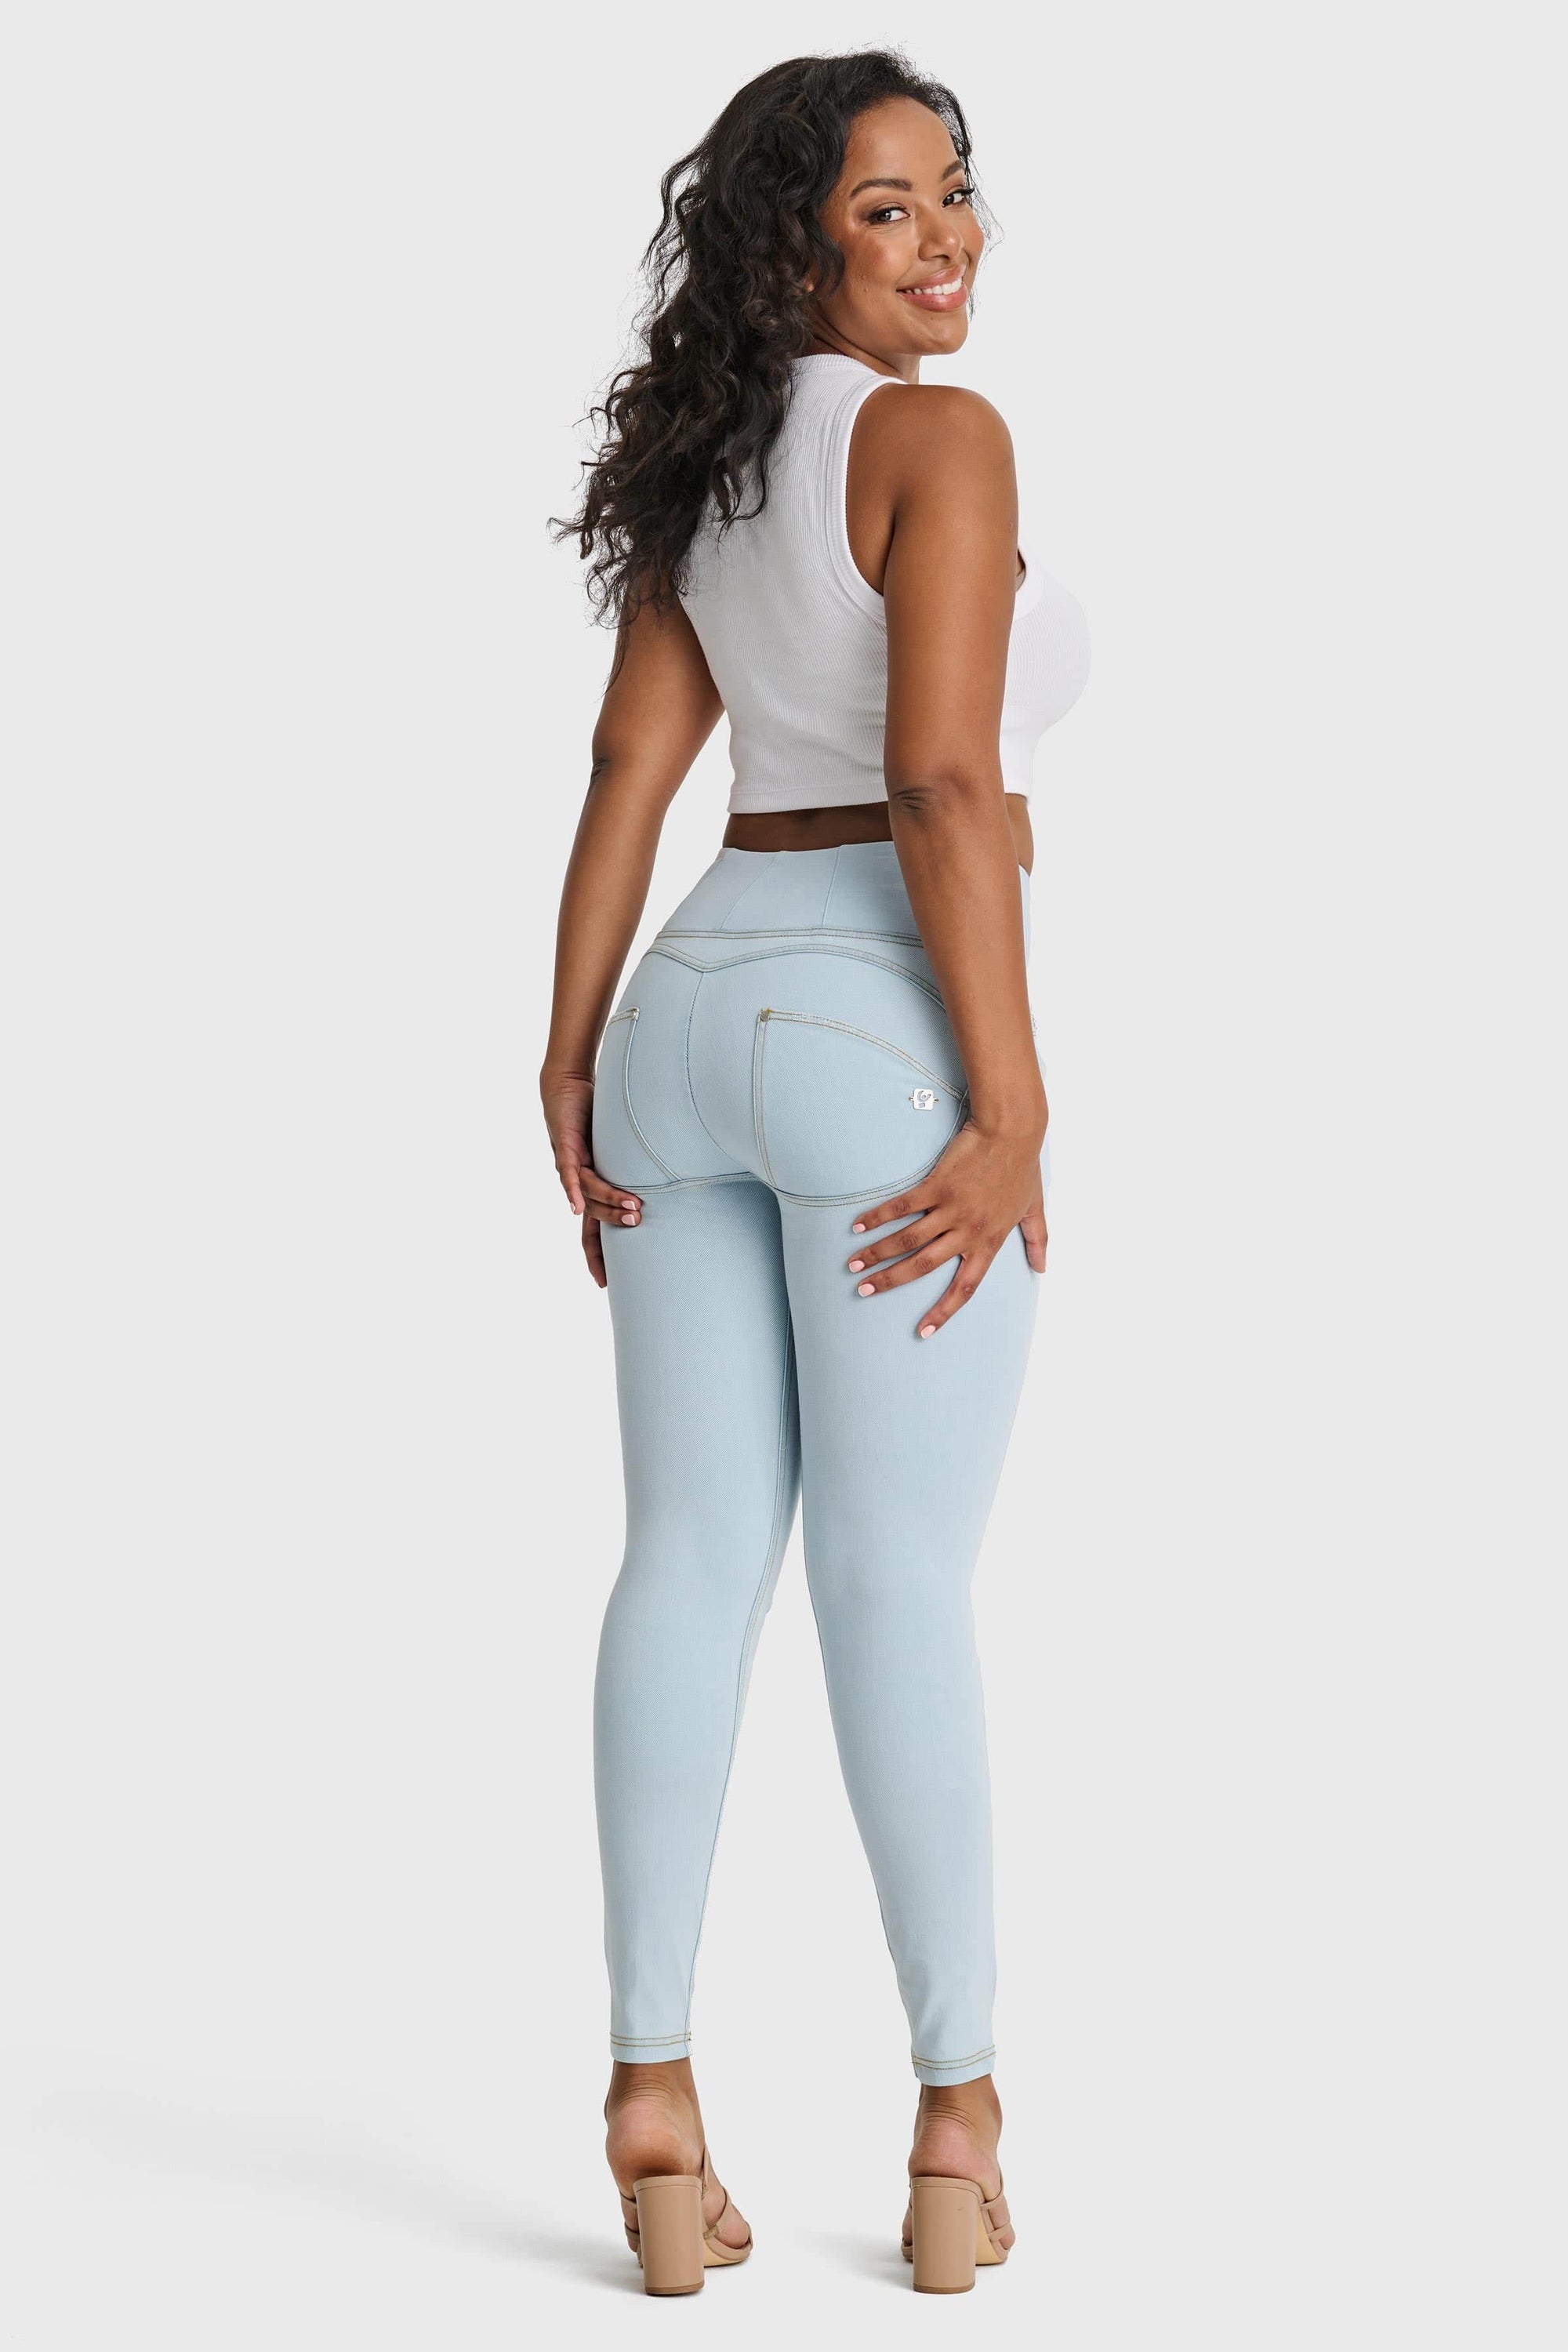 WR.UP® Snug Distressed Jeans - High Waisted - Full Length - Baby Blue + Yellow Stitching 4